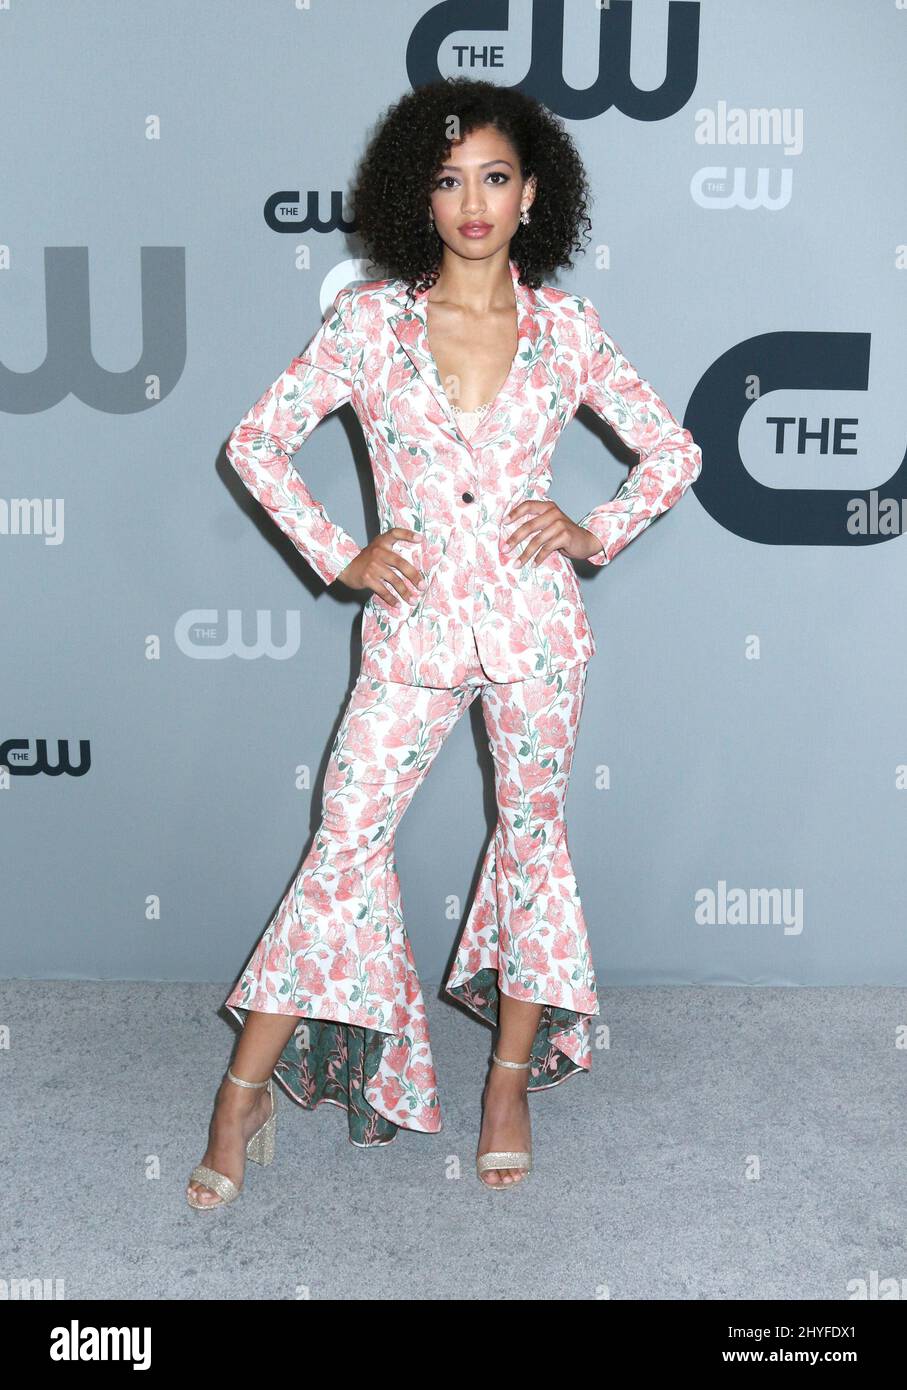 Samantha Logan attends The CW Network`s 2018 New York Upfront Held at The London Hotel on May 17, 2018 Stock Photo